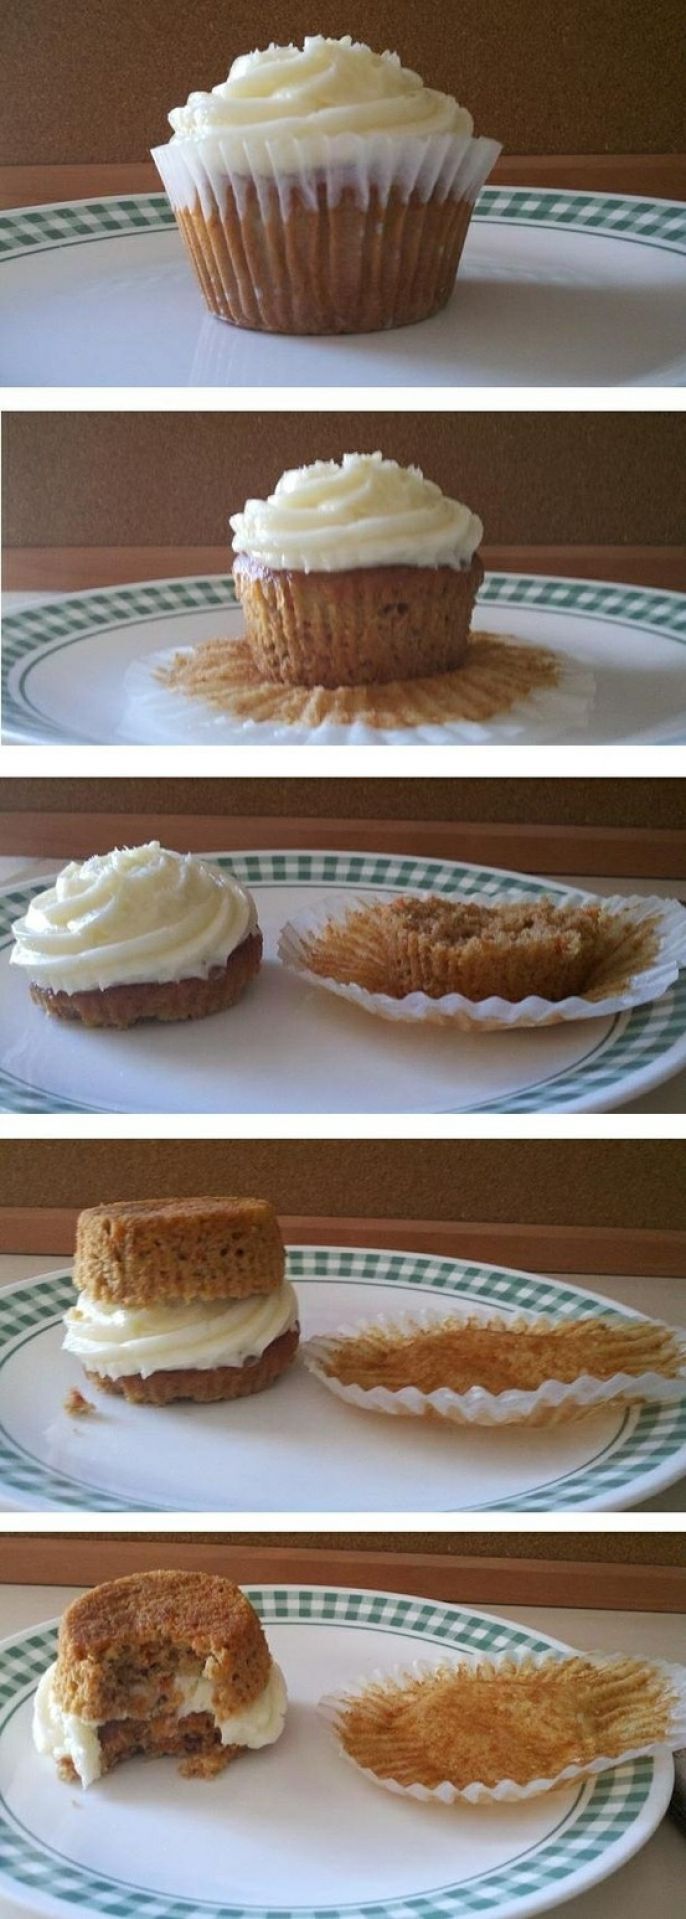 There is a right and wrong way to eat a cupcake, Win! 